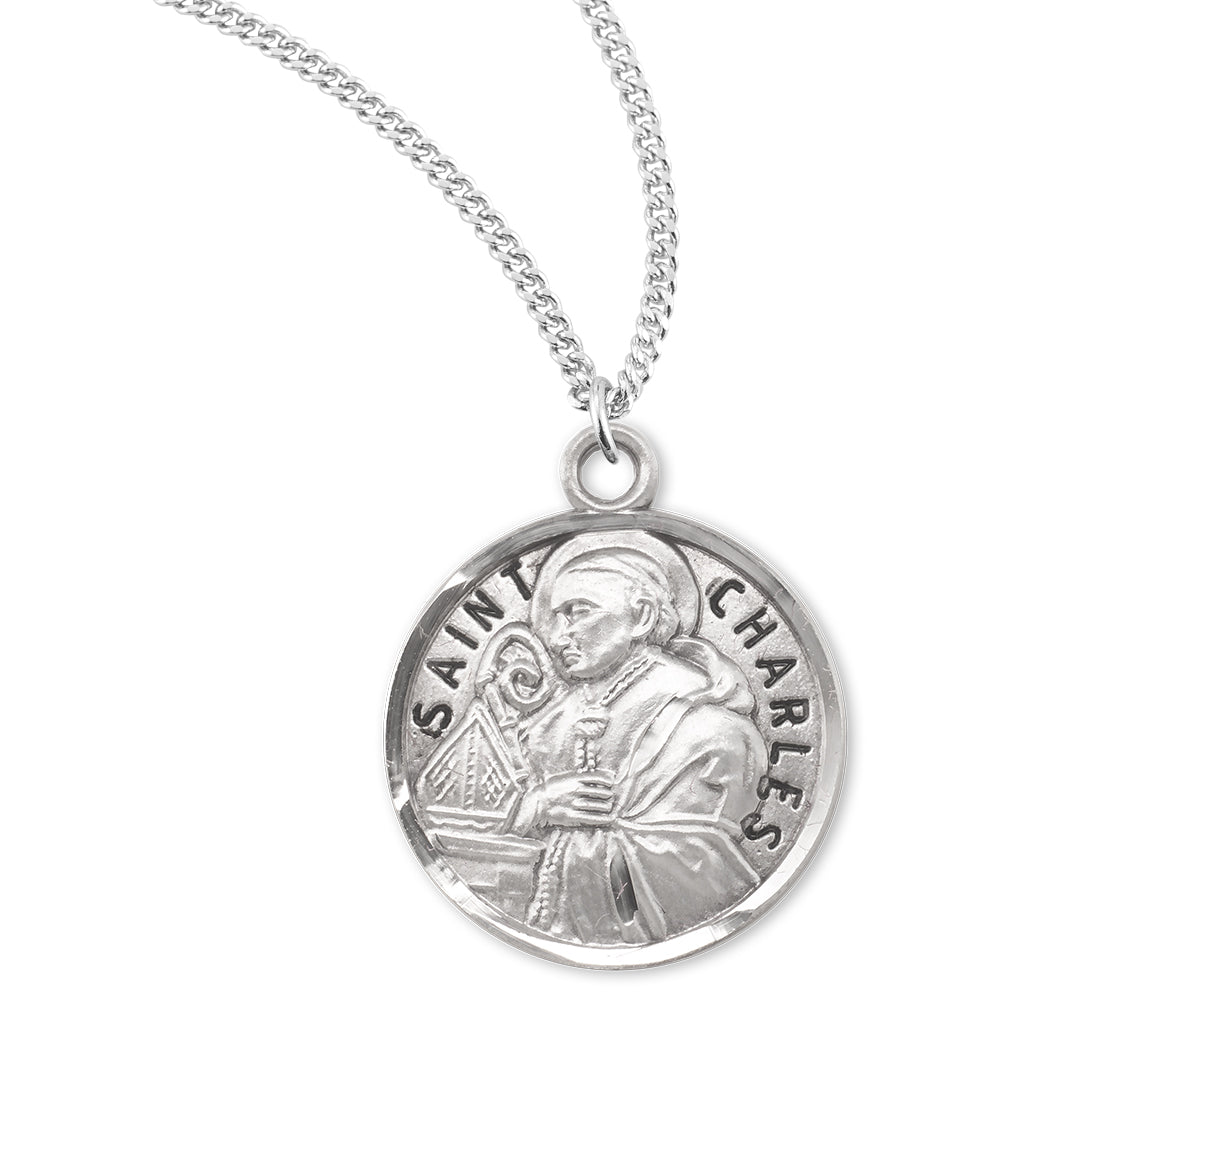 Patron Saint Charles Round Sterling Silver Medal